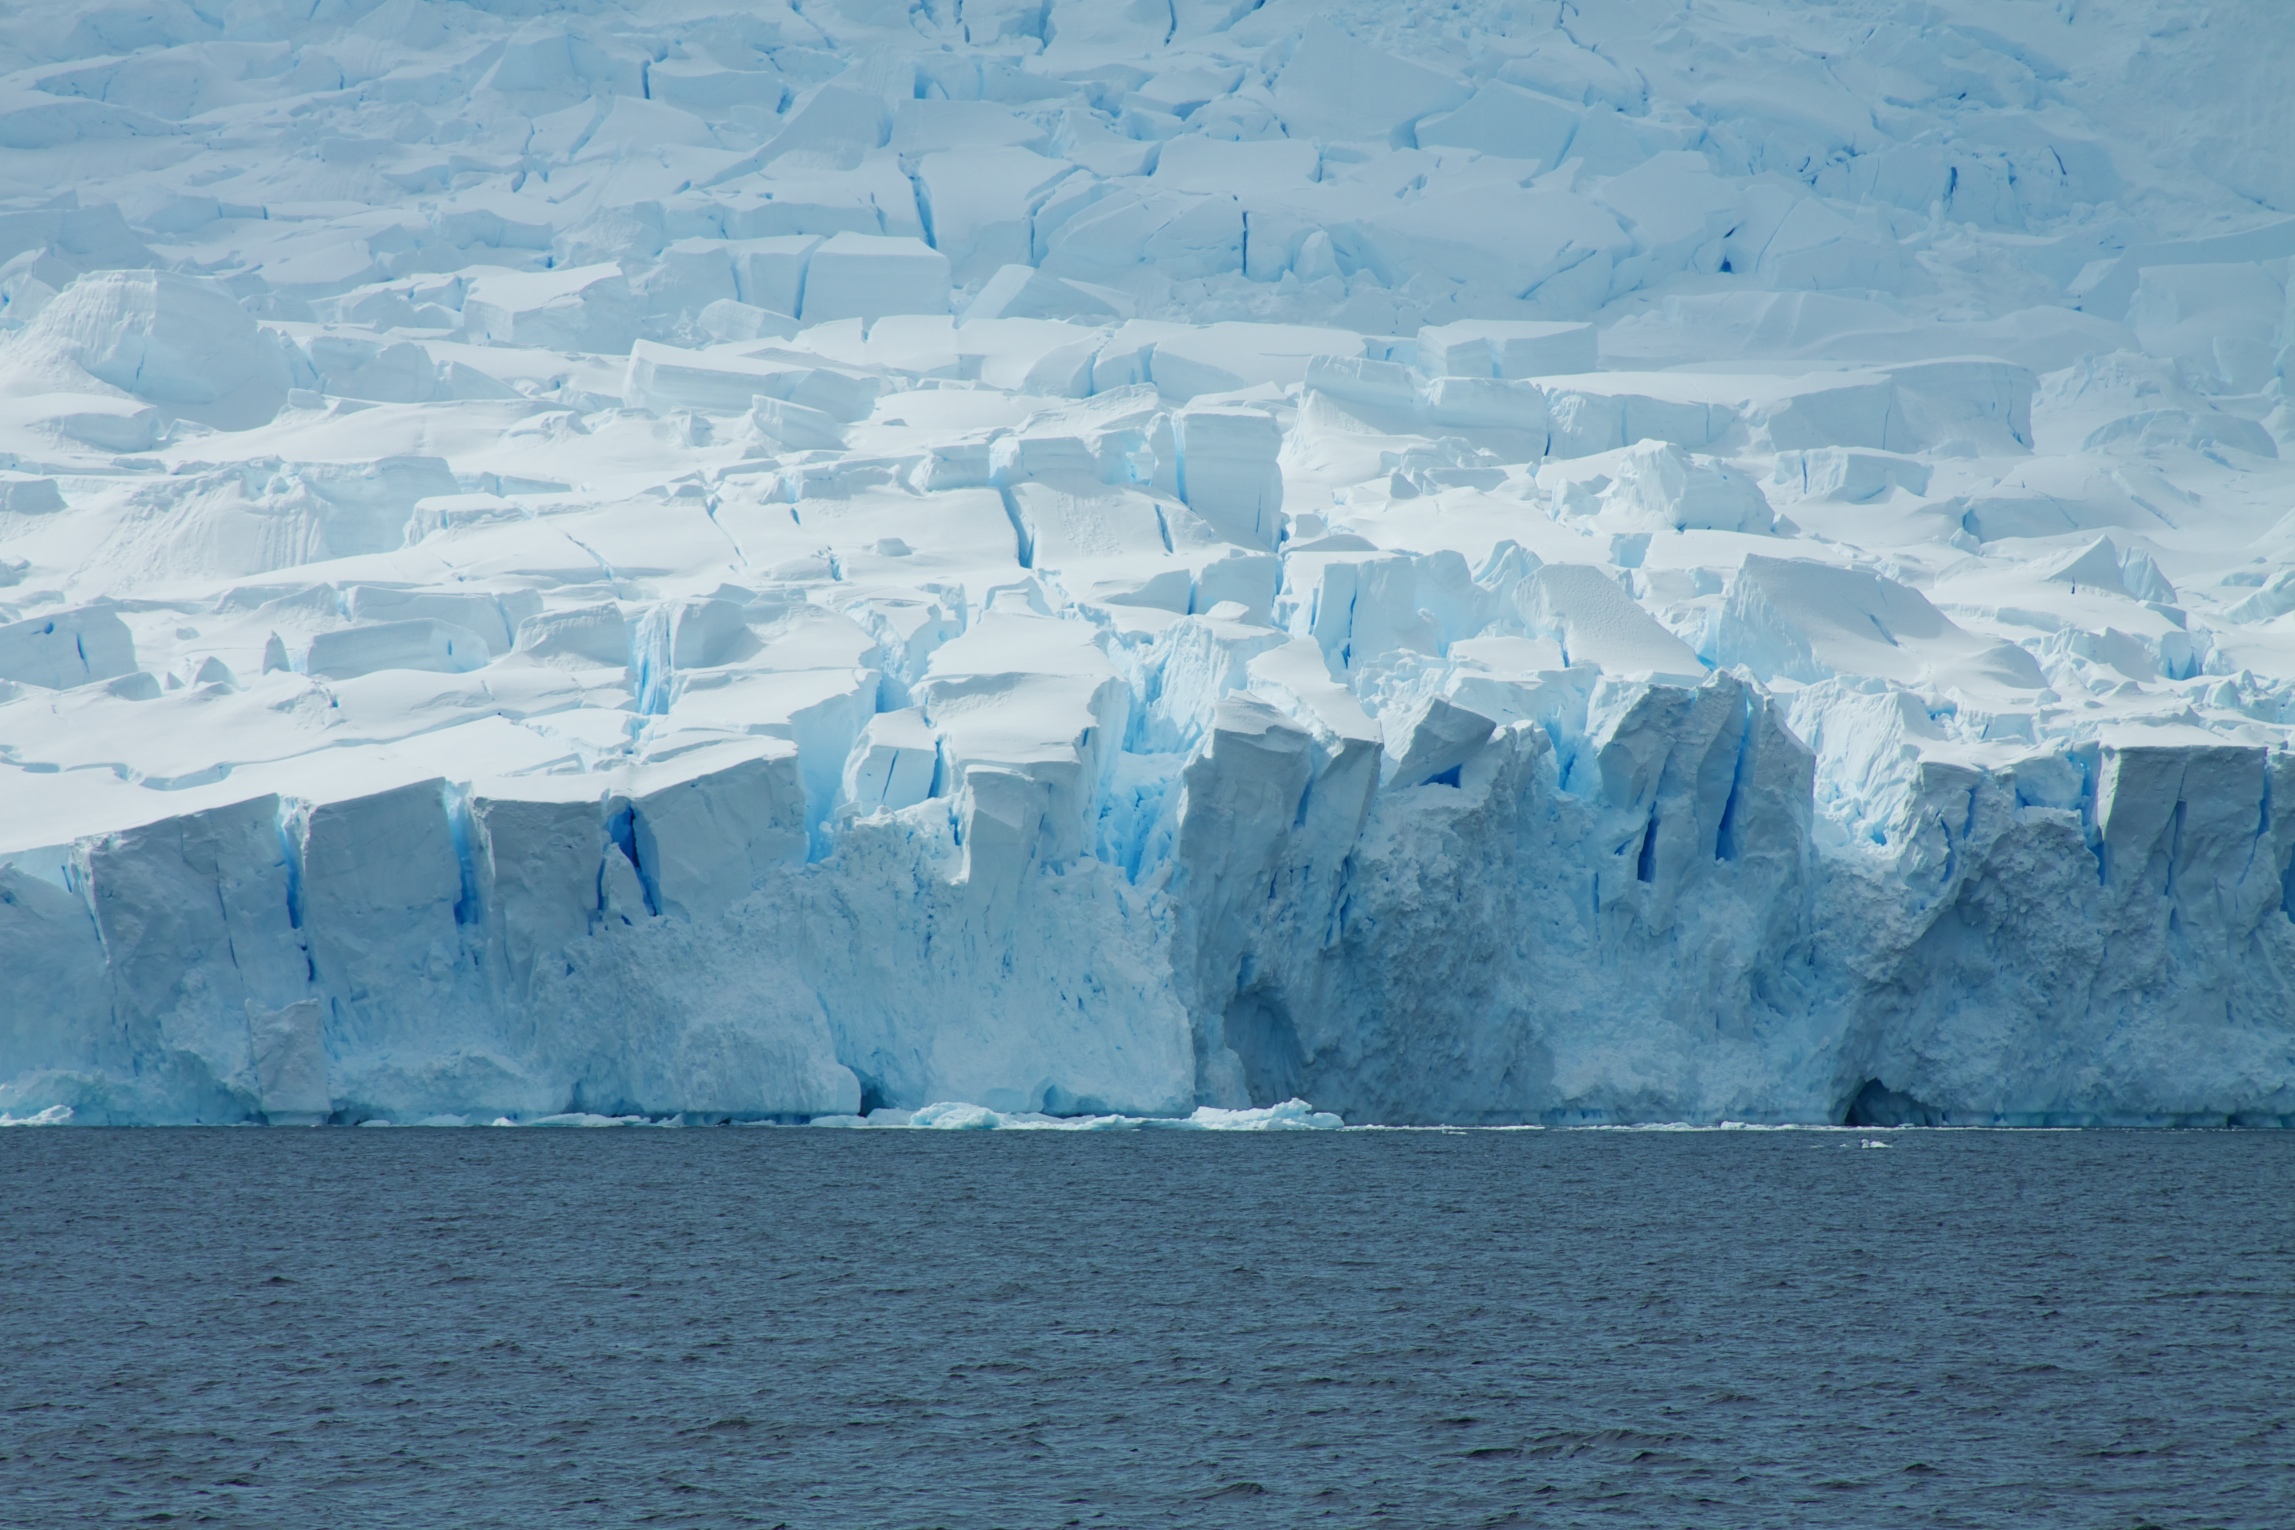 Amazing shapes and deep blue tumbled down the huge glaciers that lined the shores.